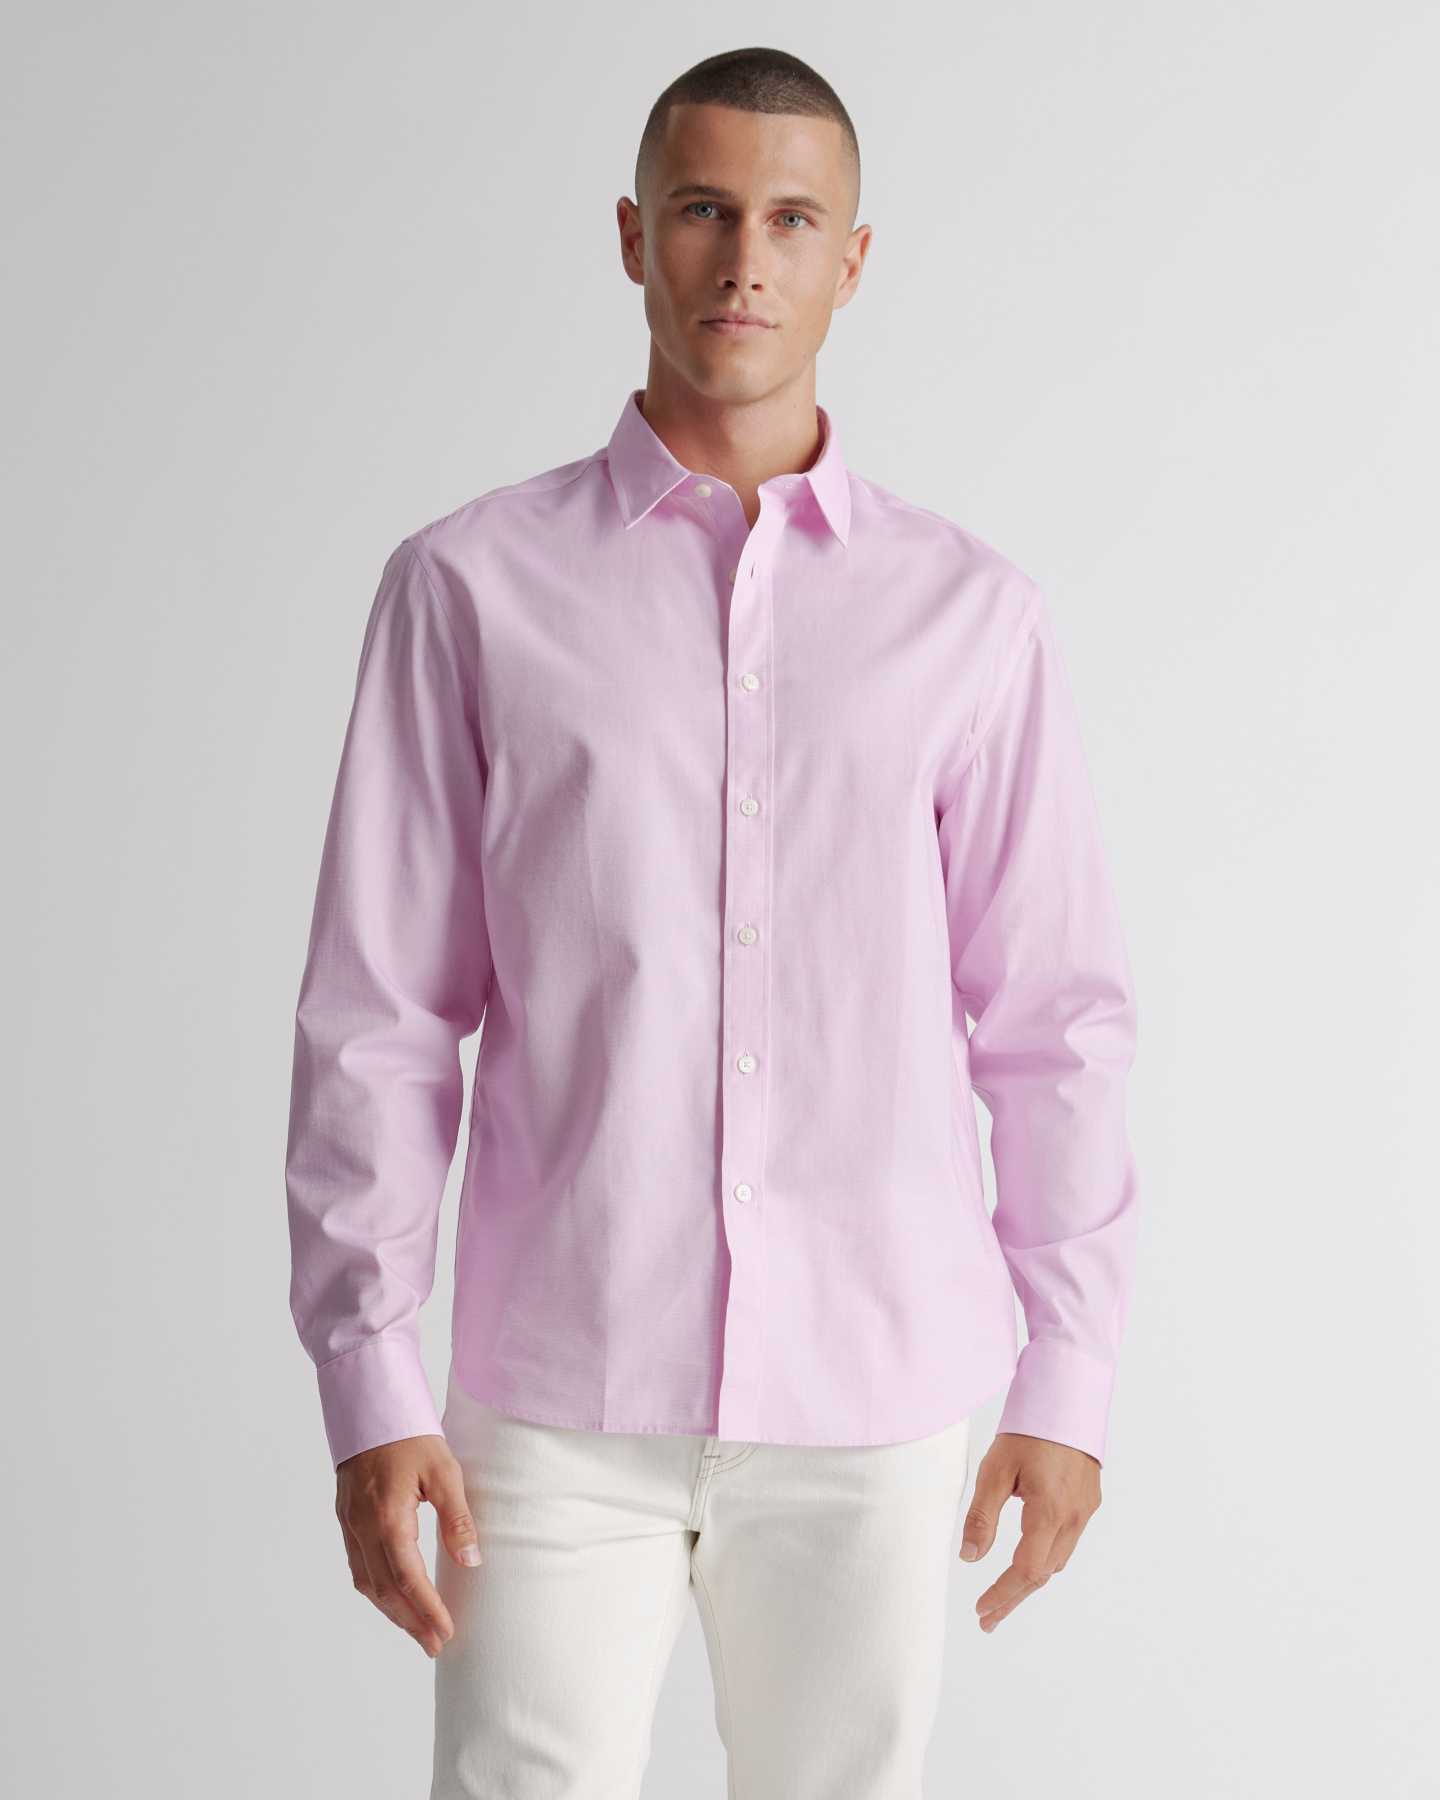 The Untucked Dress Shirt - Pink FilCoupe